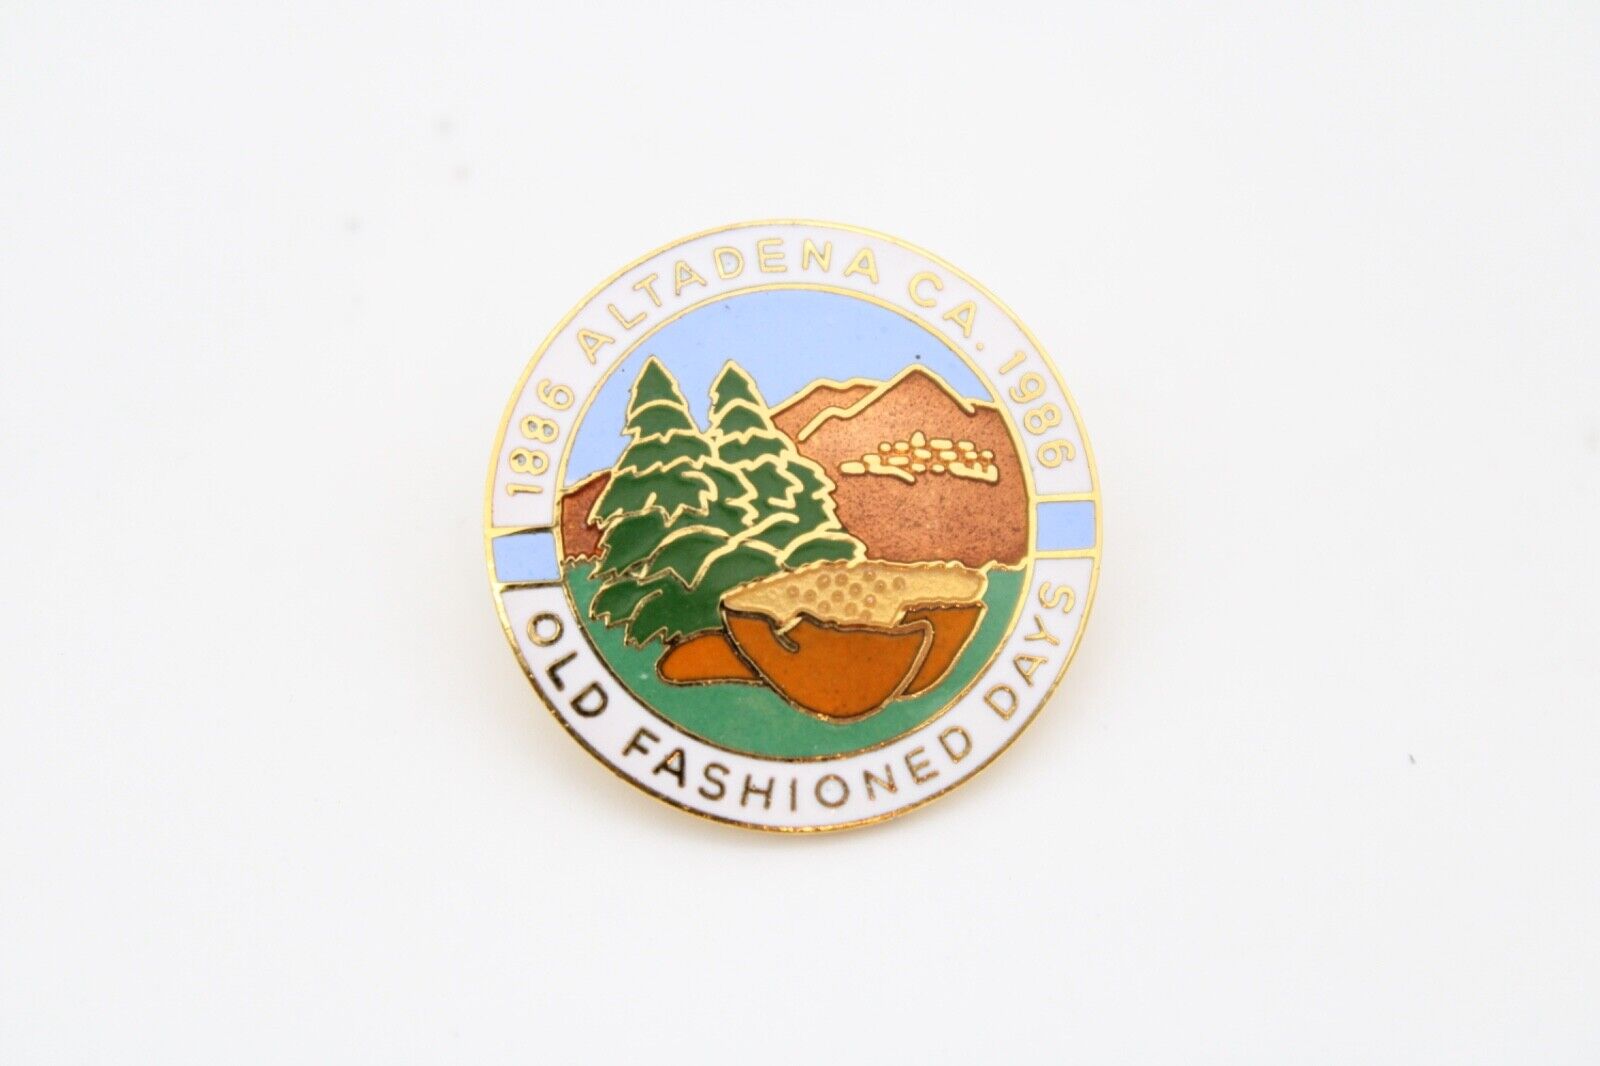 Altadena CA Lapel Hat Pin 1886 1986 Old Fashioned Days Chamber of Commerce 1/500